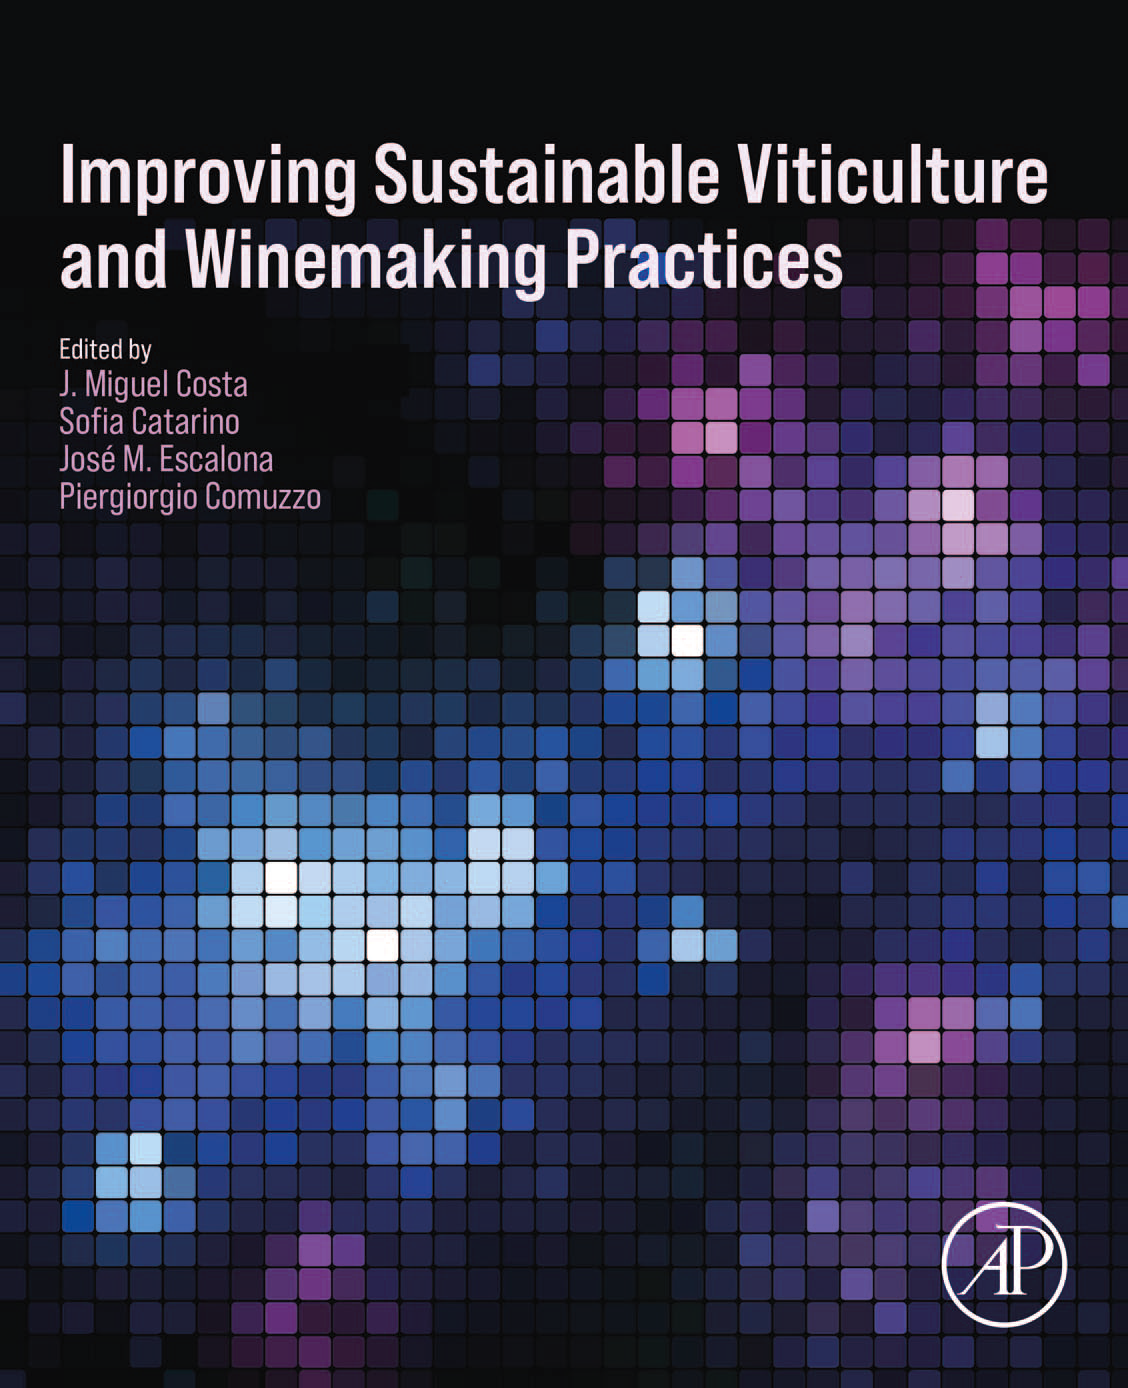 Improving Sustainable Viticulture and Winemaking Practices